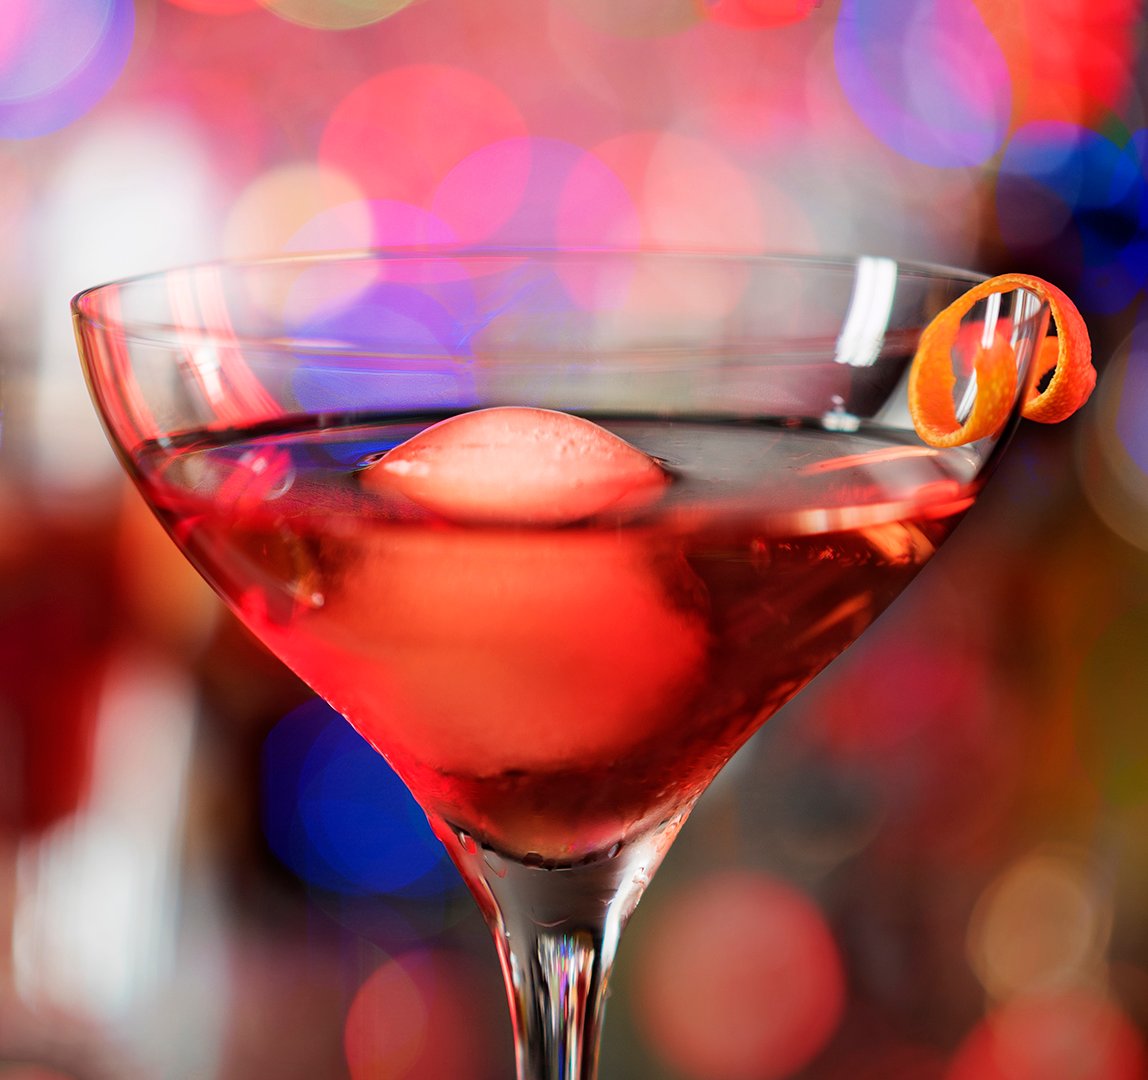 Red cocktail. Panasonic GH4 and Lumix 42.5mm f1.2 @ f1.2